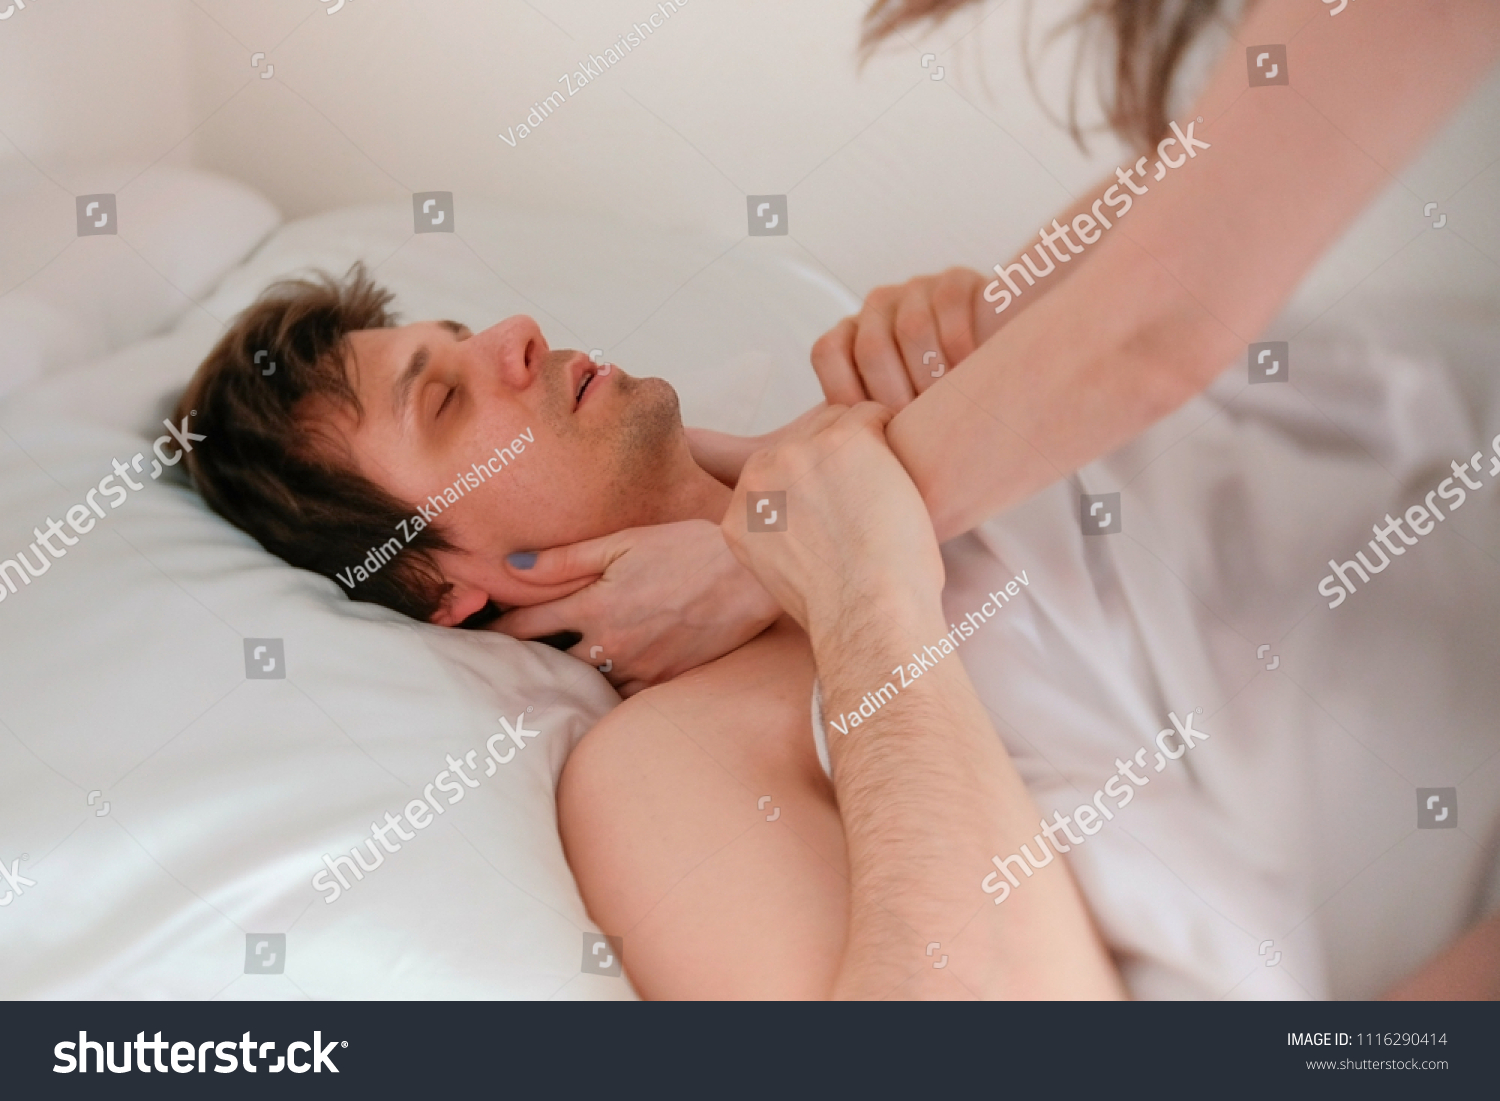 Husband Wife Have Sex Morning Stock